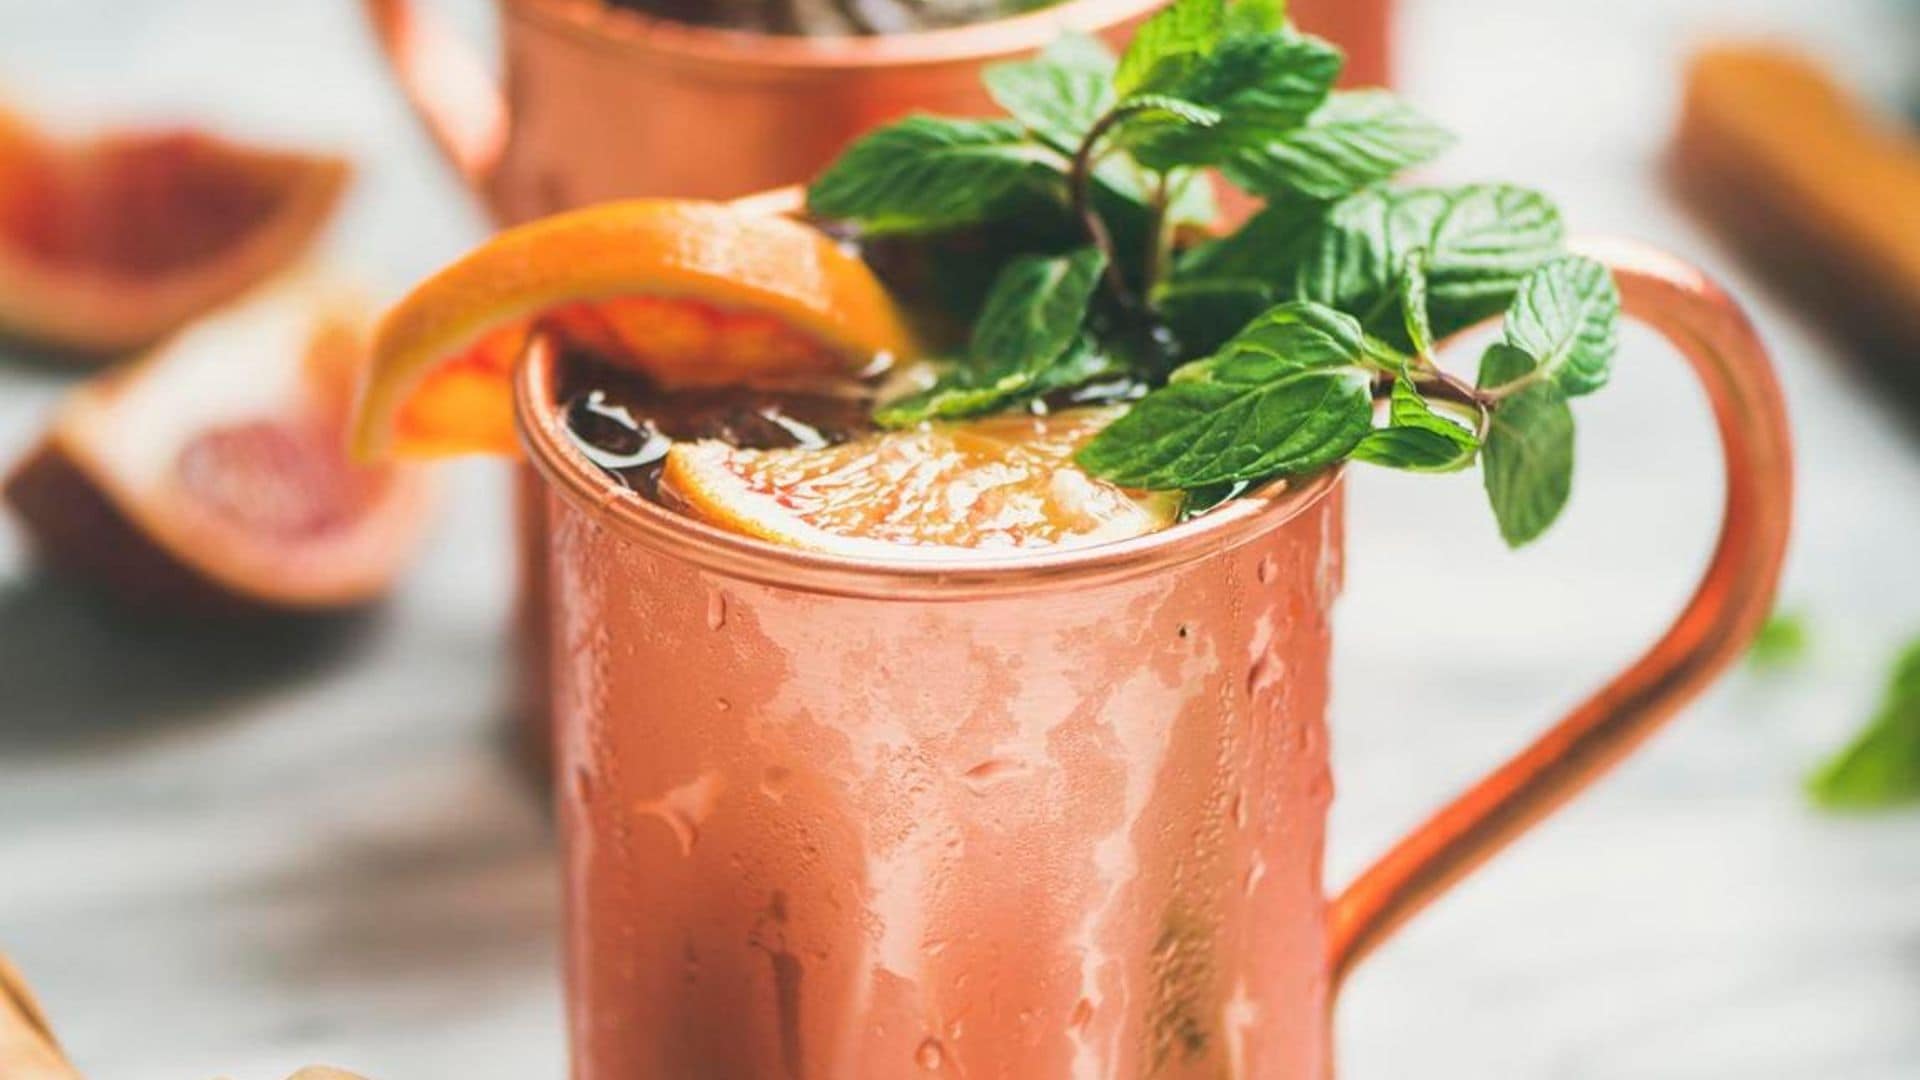 Sit back and relax with these 13 celebratory cocktails and mocktails to mark the weekend